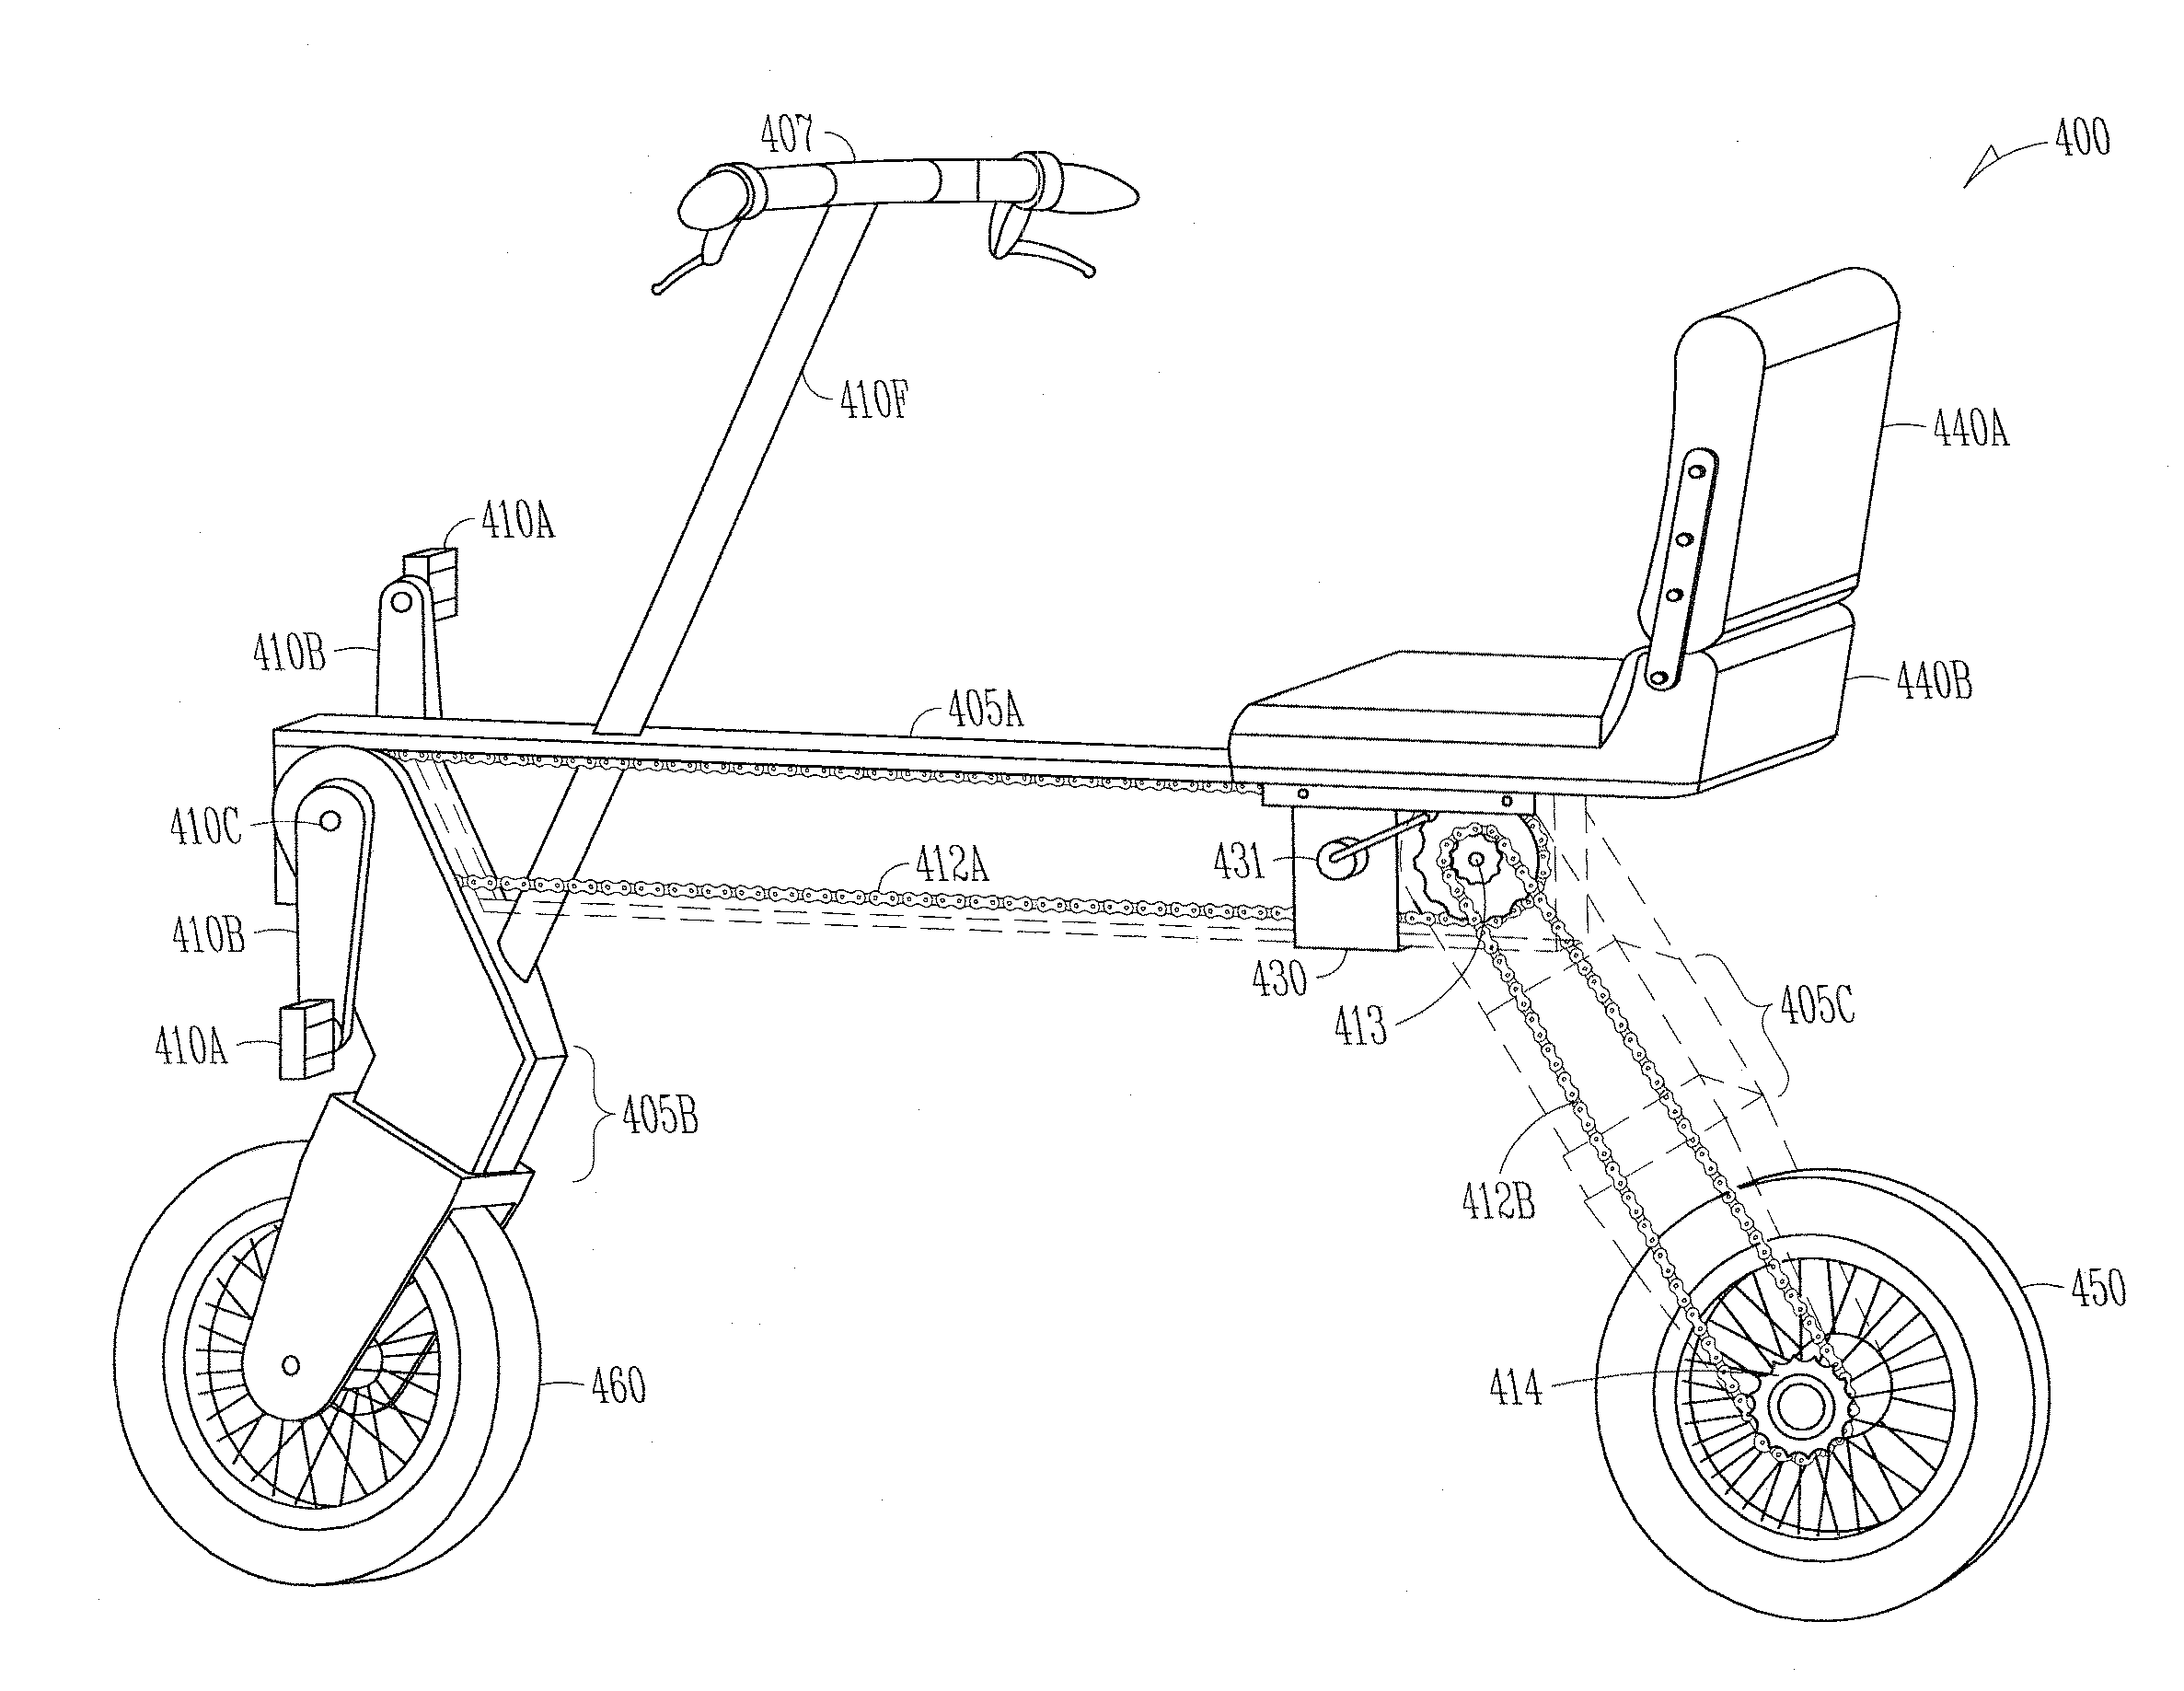 Folding vehicle having a chassis that functions as a protective, carry-on casing